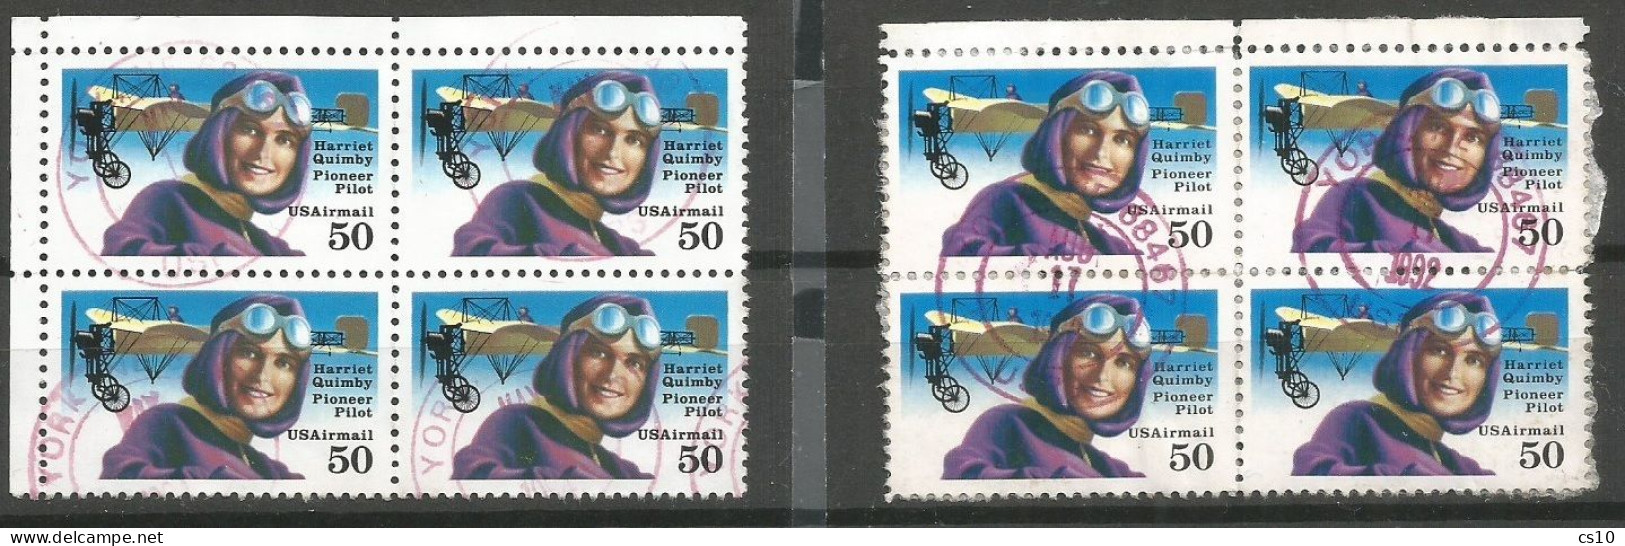 USA 1991 Aviation Pioneers C.50 Harriet Quimby Airmail SC.# C128 In #2 Used Blocks4 Perforation Line + Comb !!! - Collezioni & Lotti